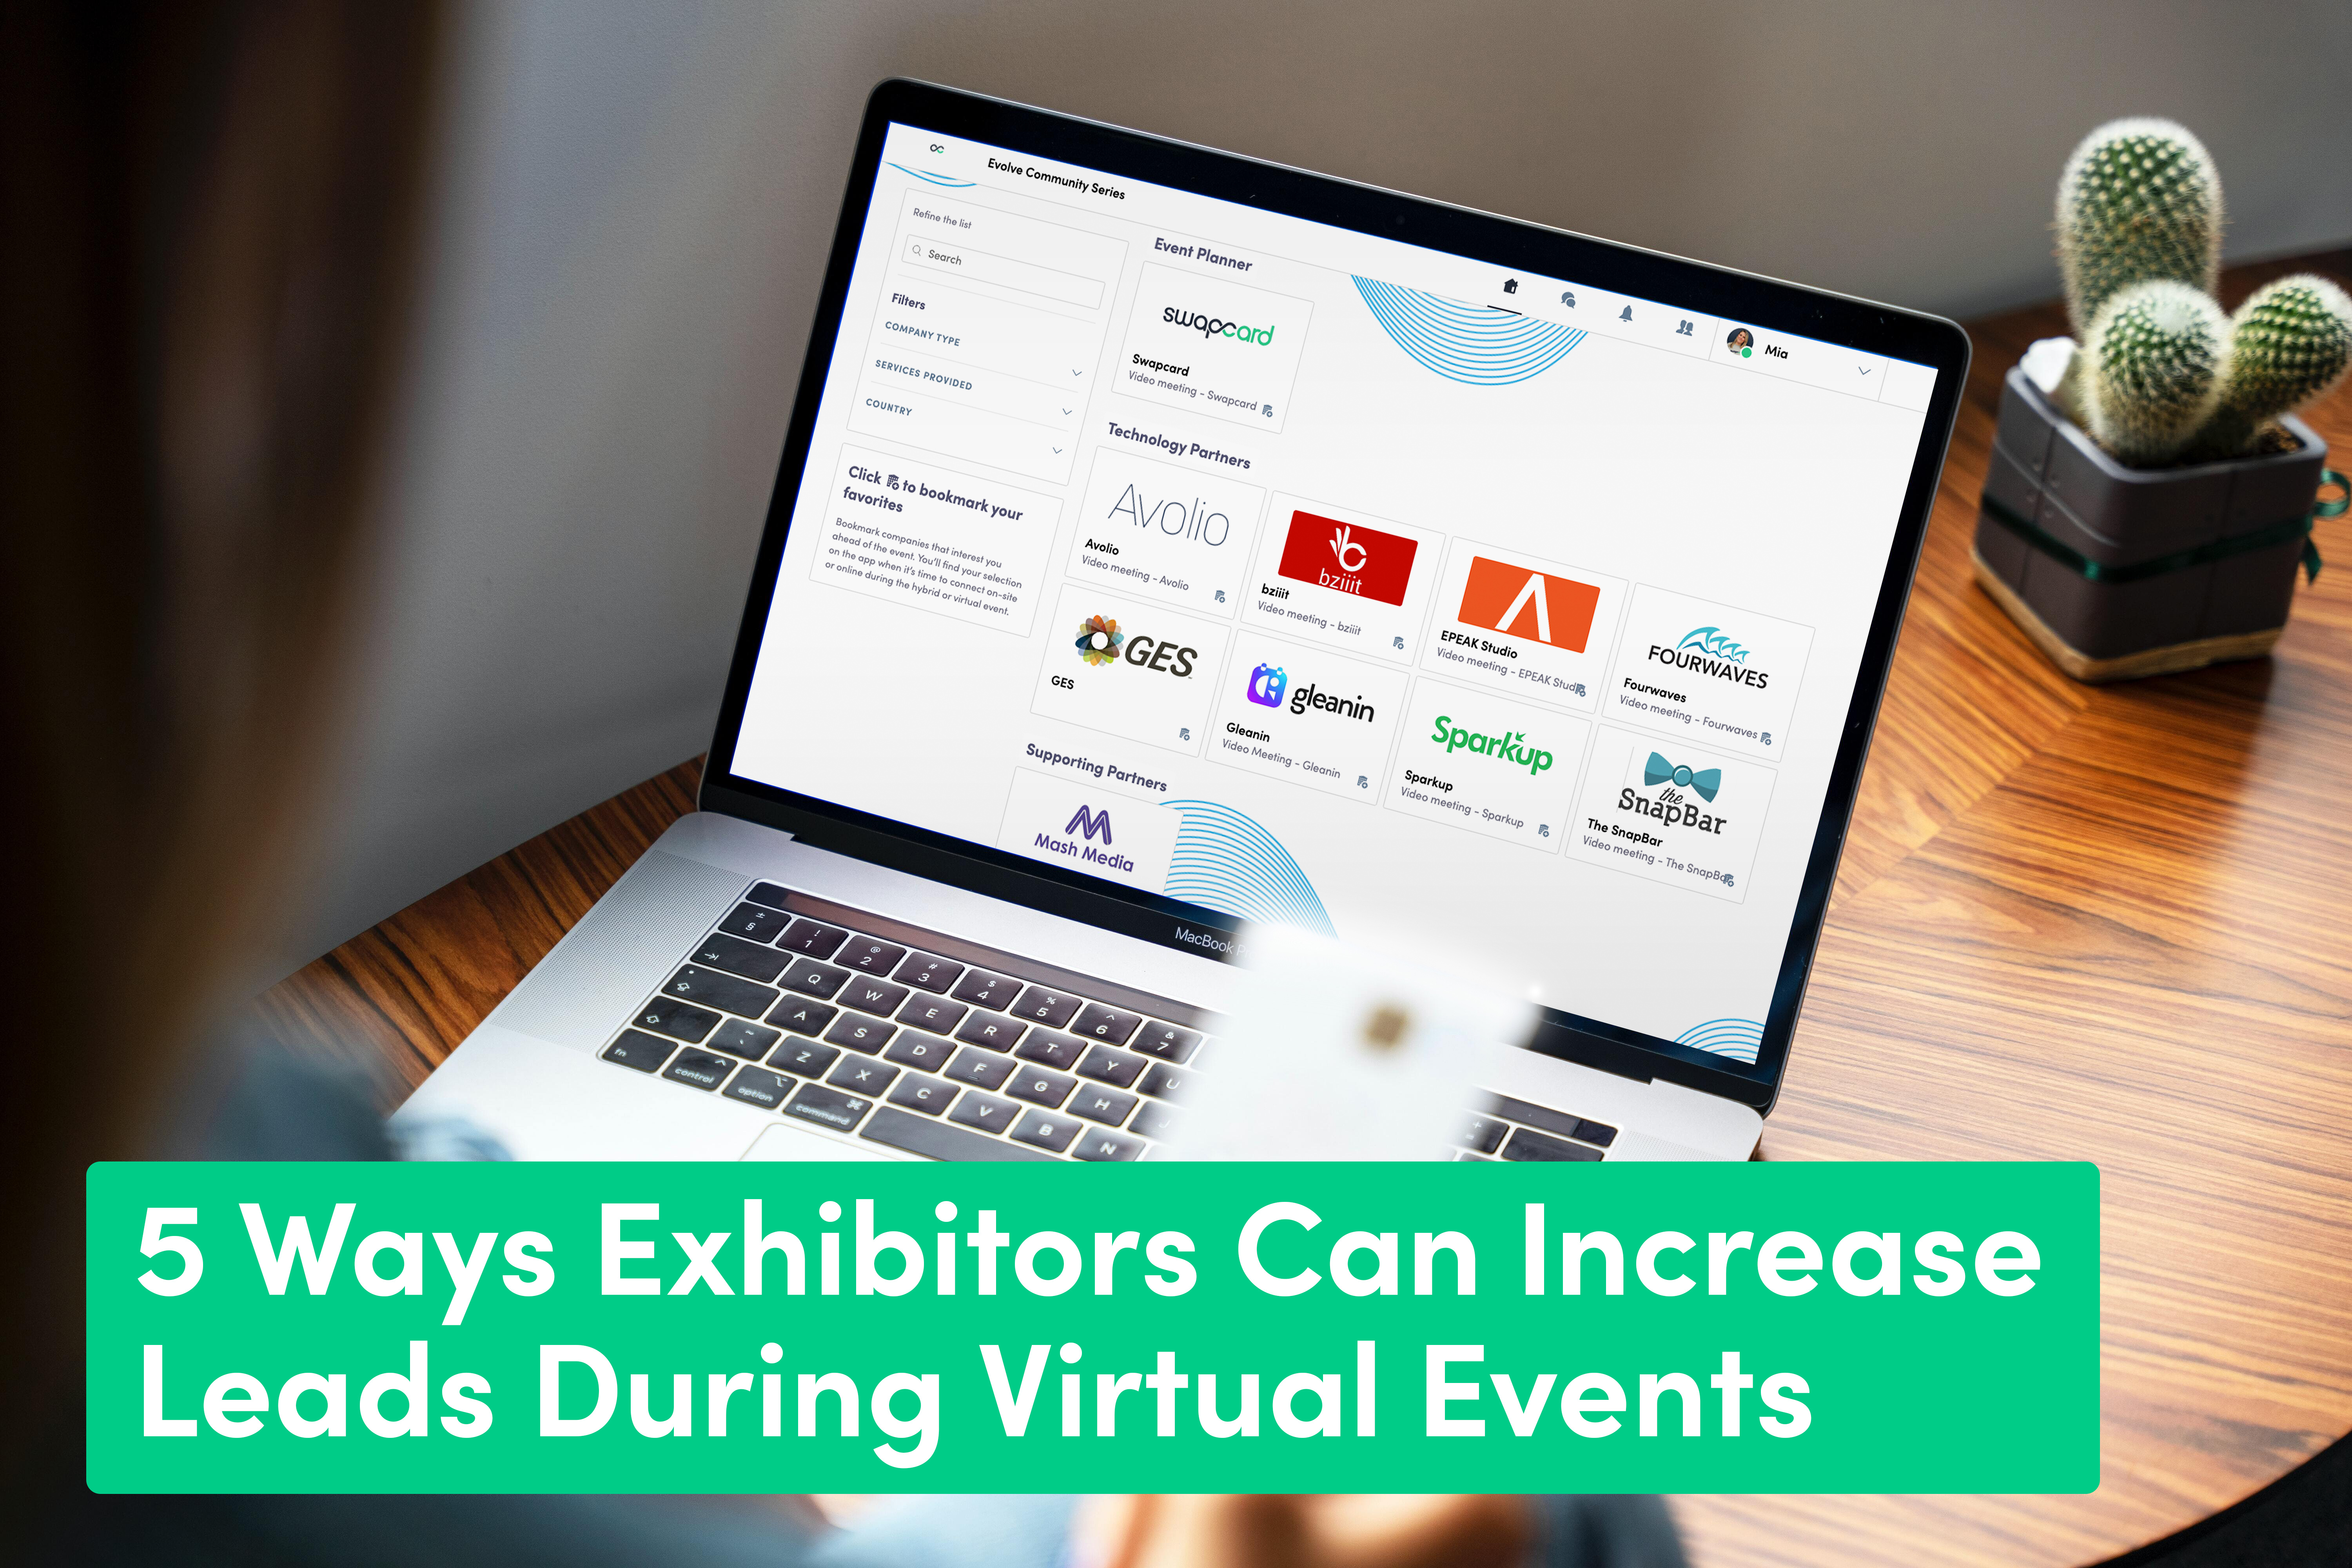 5 Ways Exhibitors Can Increase Leads During Virtual Events